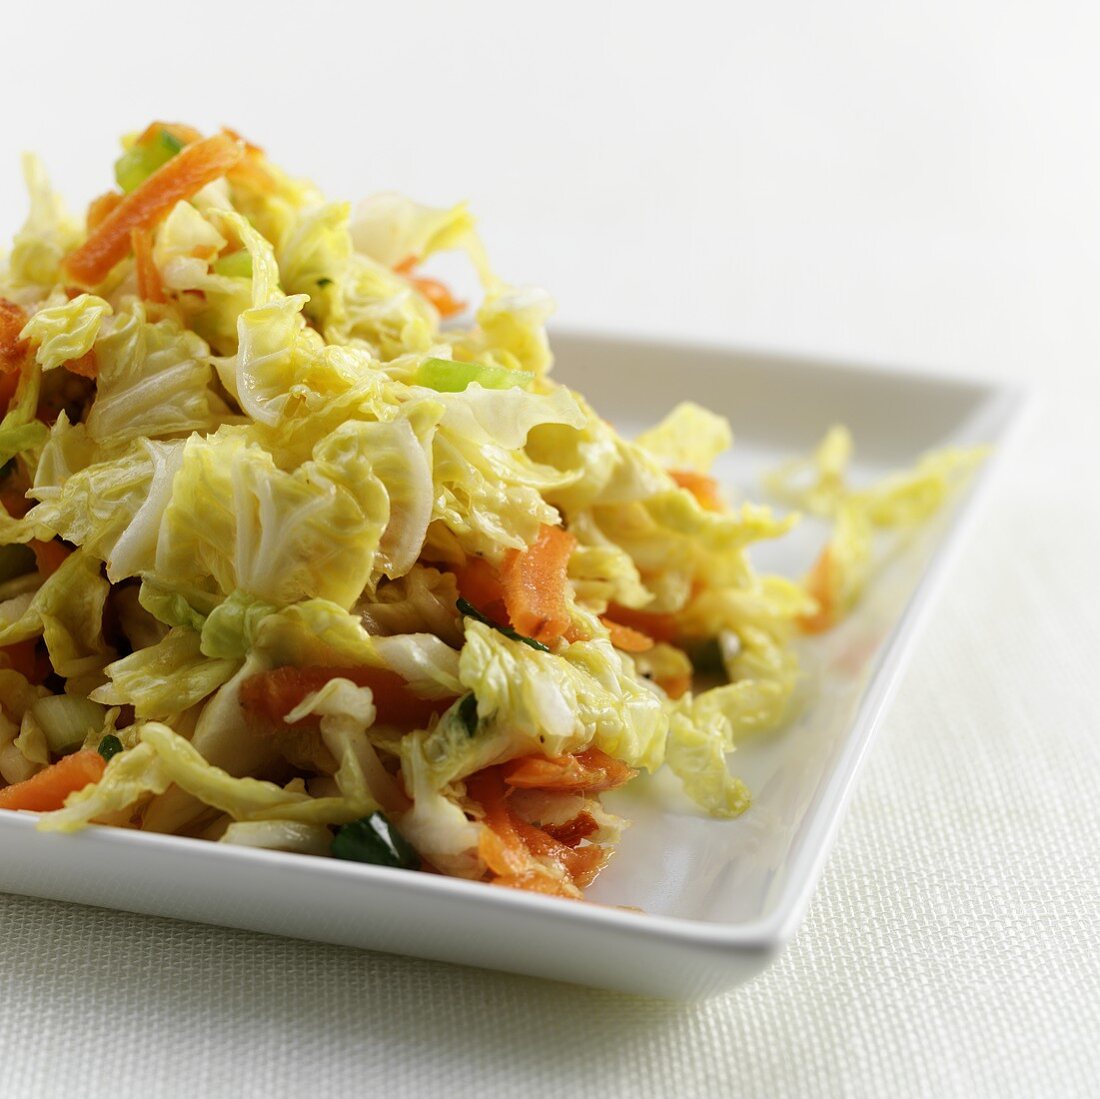 Chinese cabbage salad with carrots